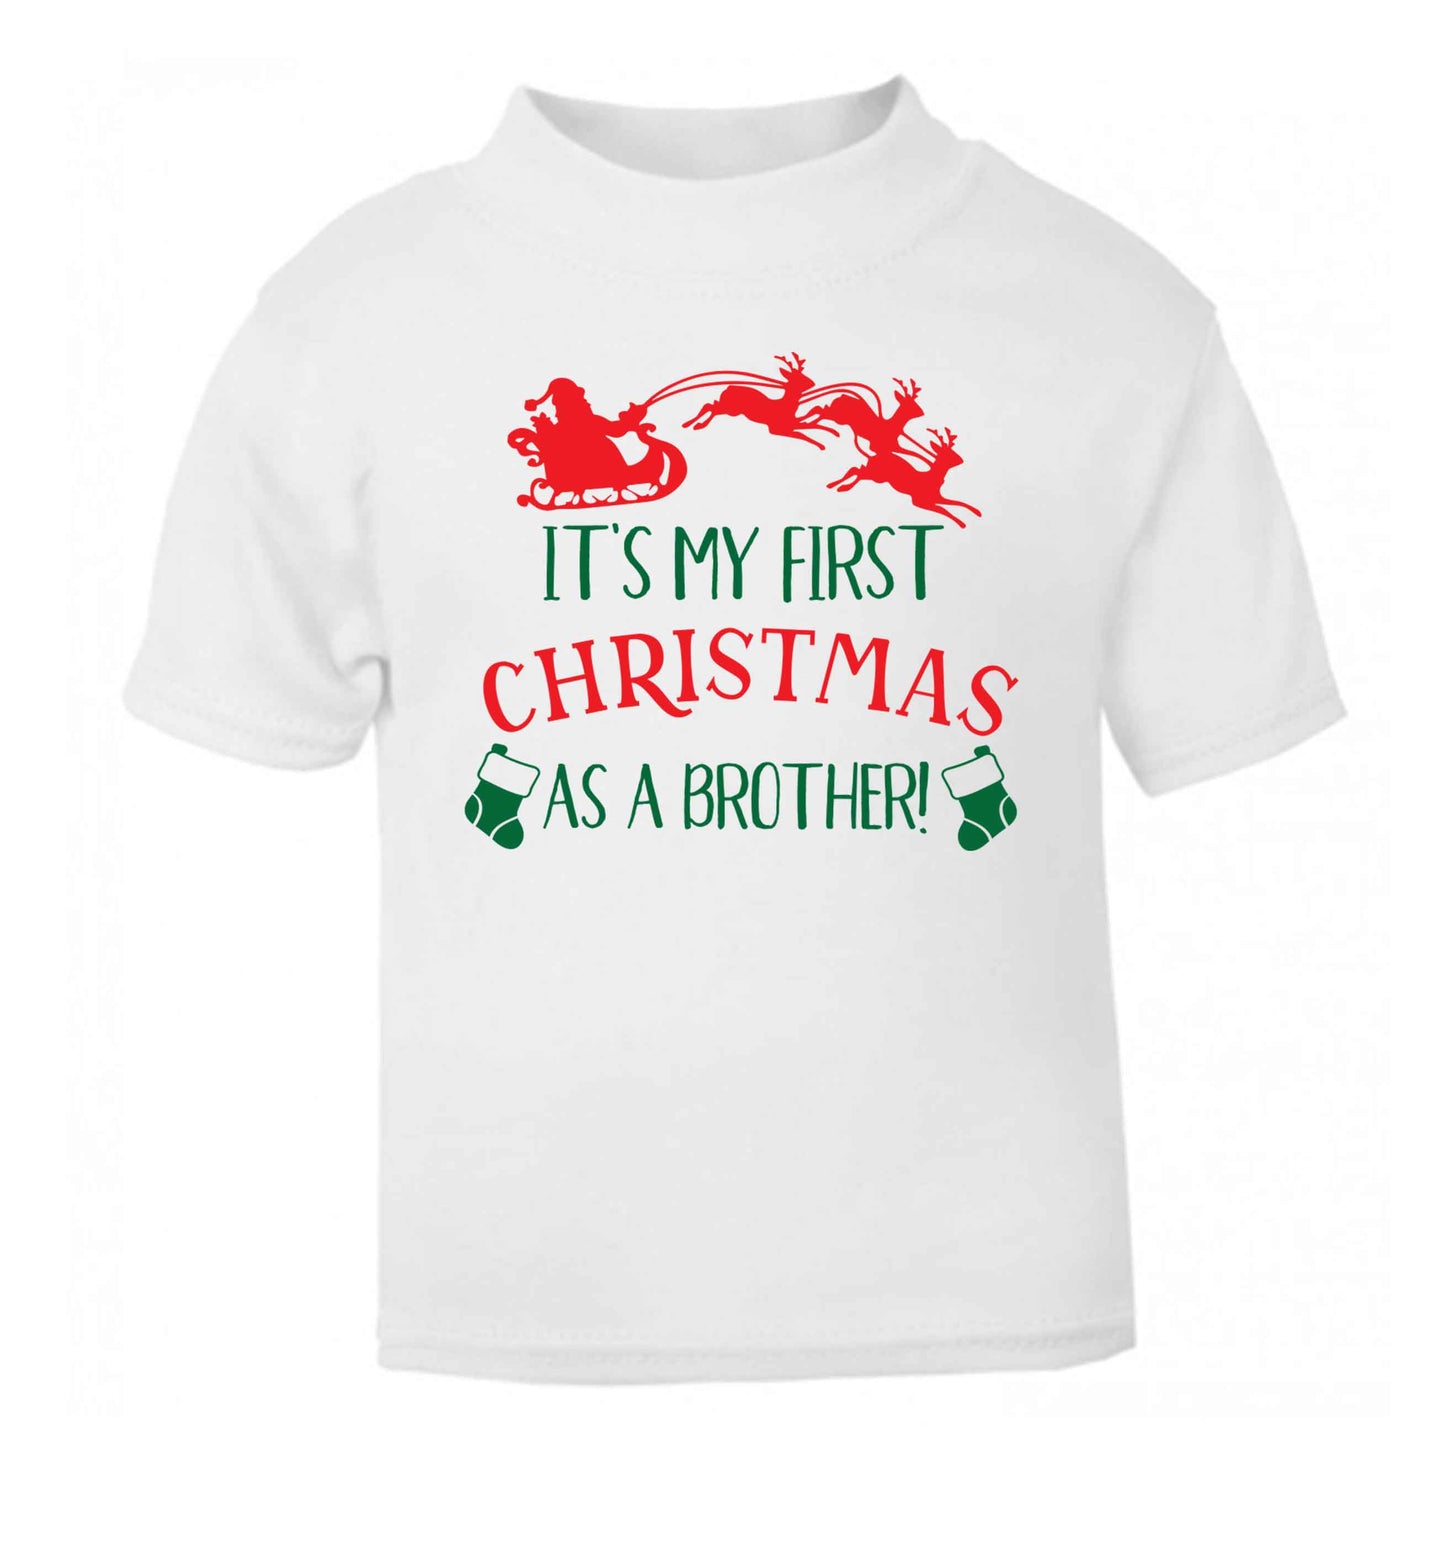 It's my first Christmas as a brother! white Baby Toddler Tshirt 2 Years